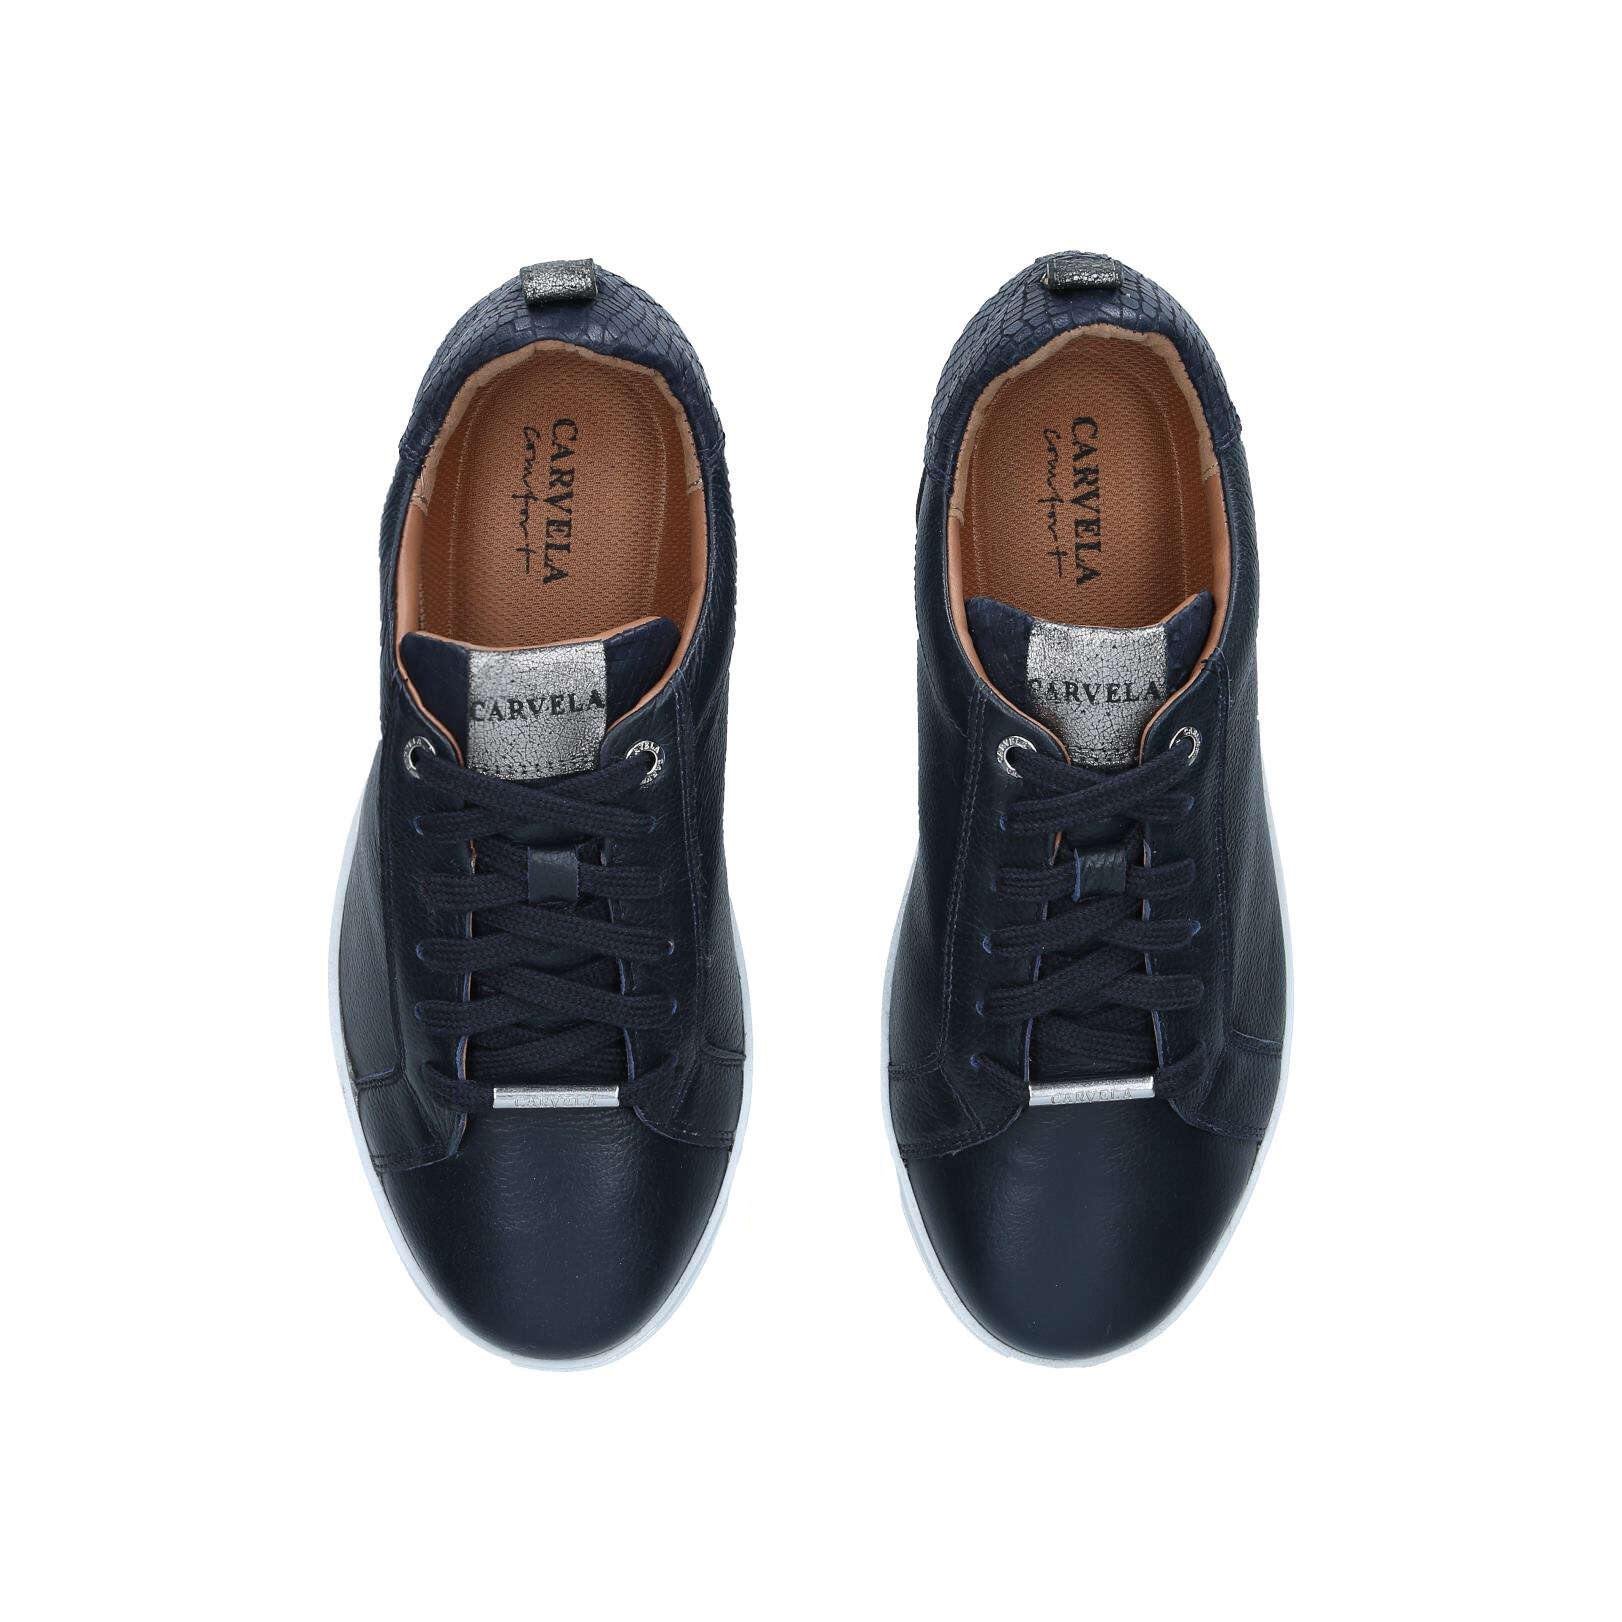 54 Casual Carvela comfort navy shoes Combine with Best Outfit